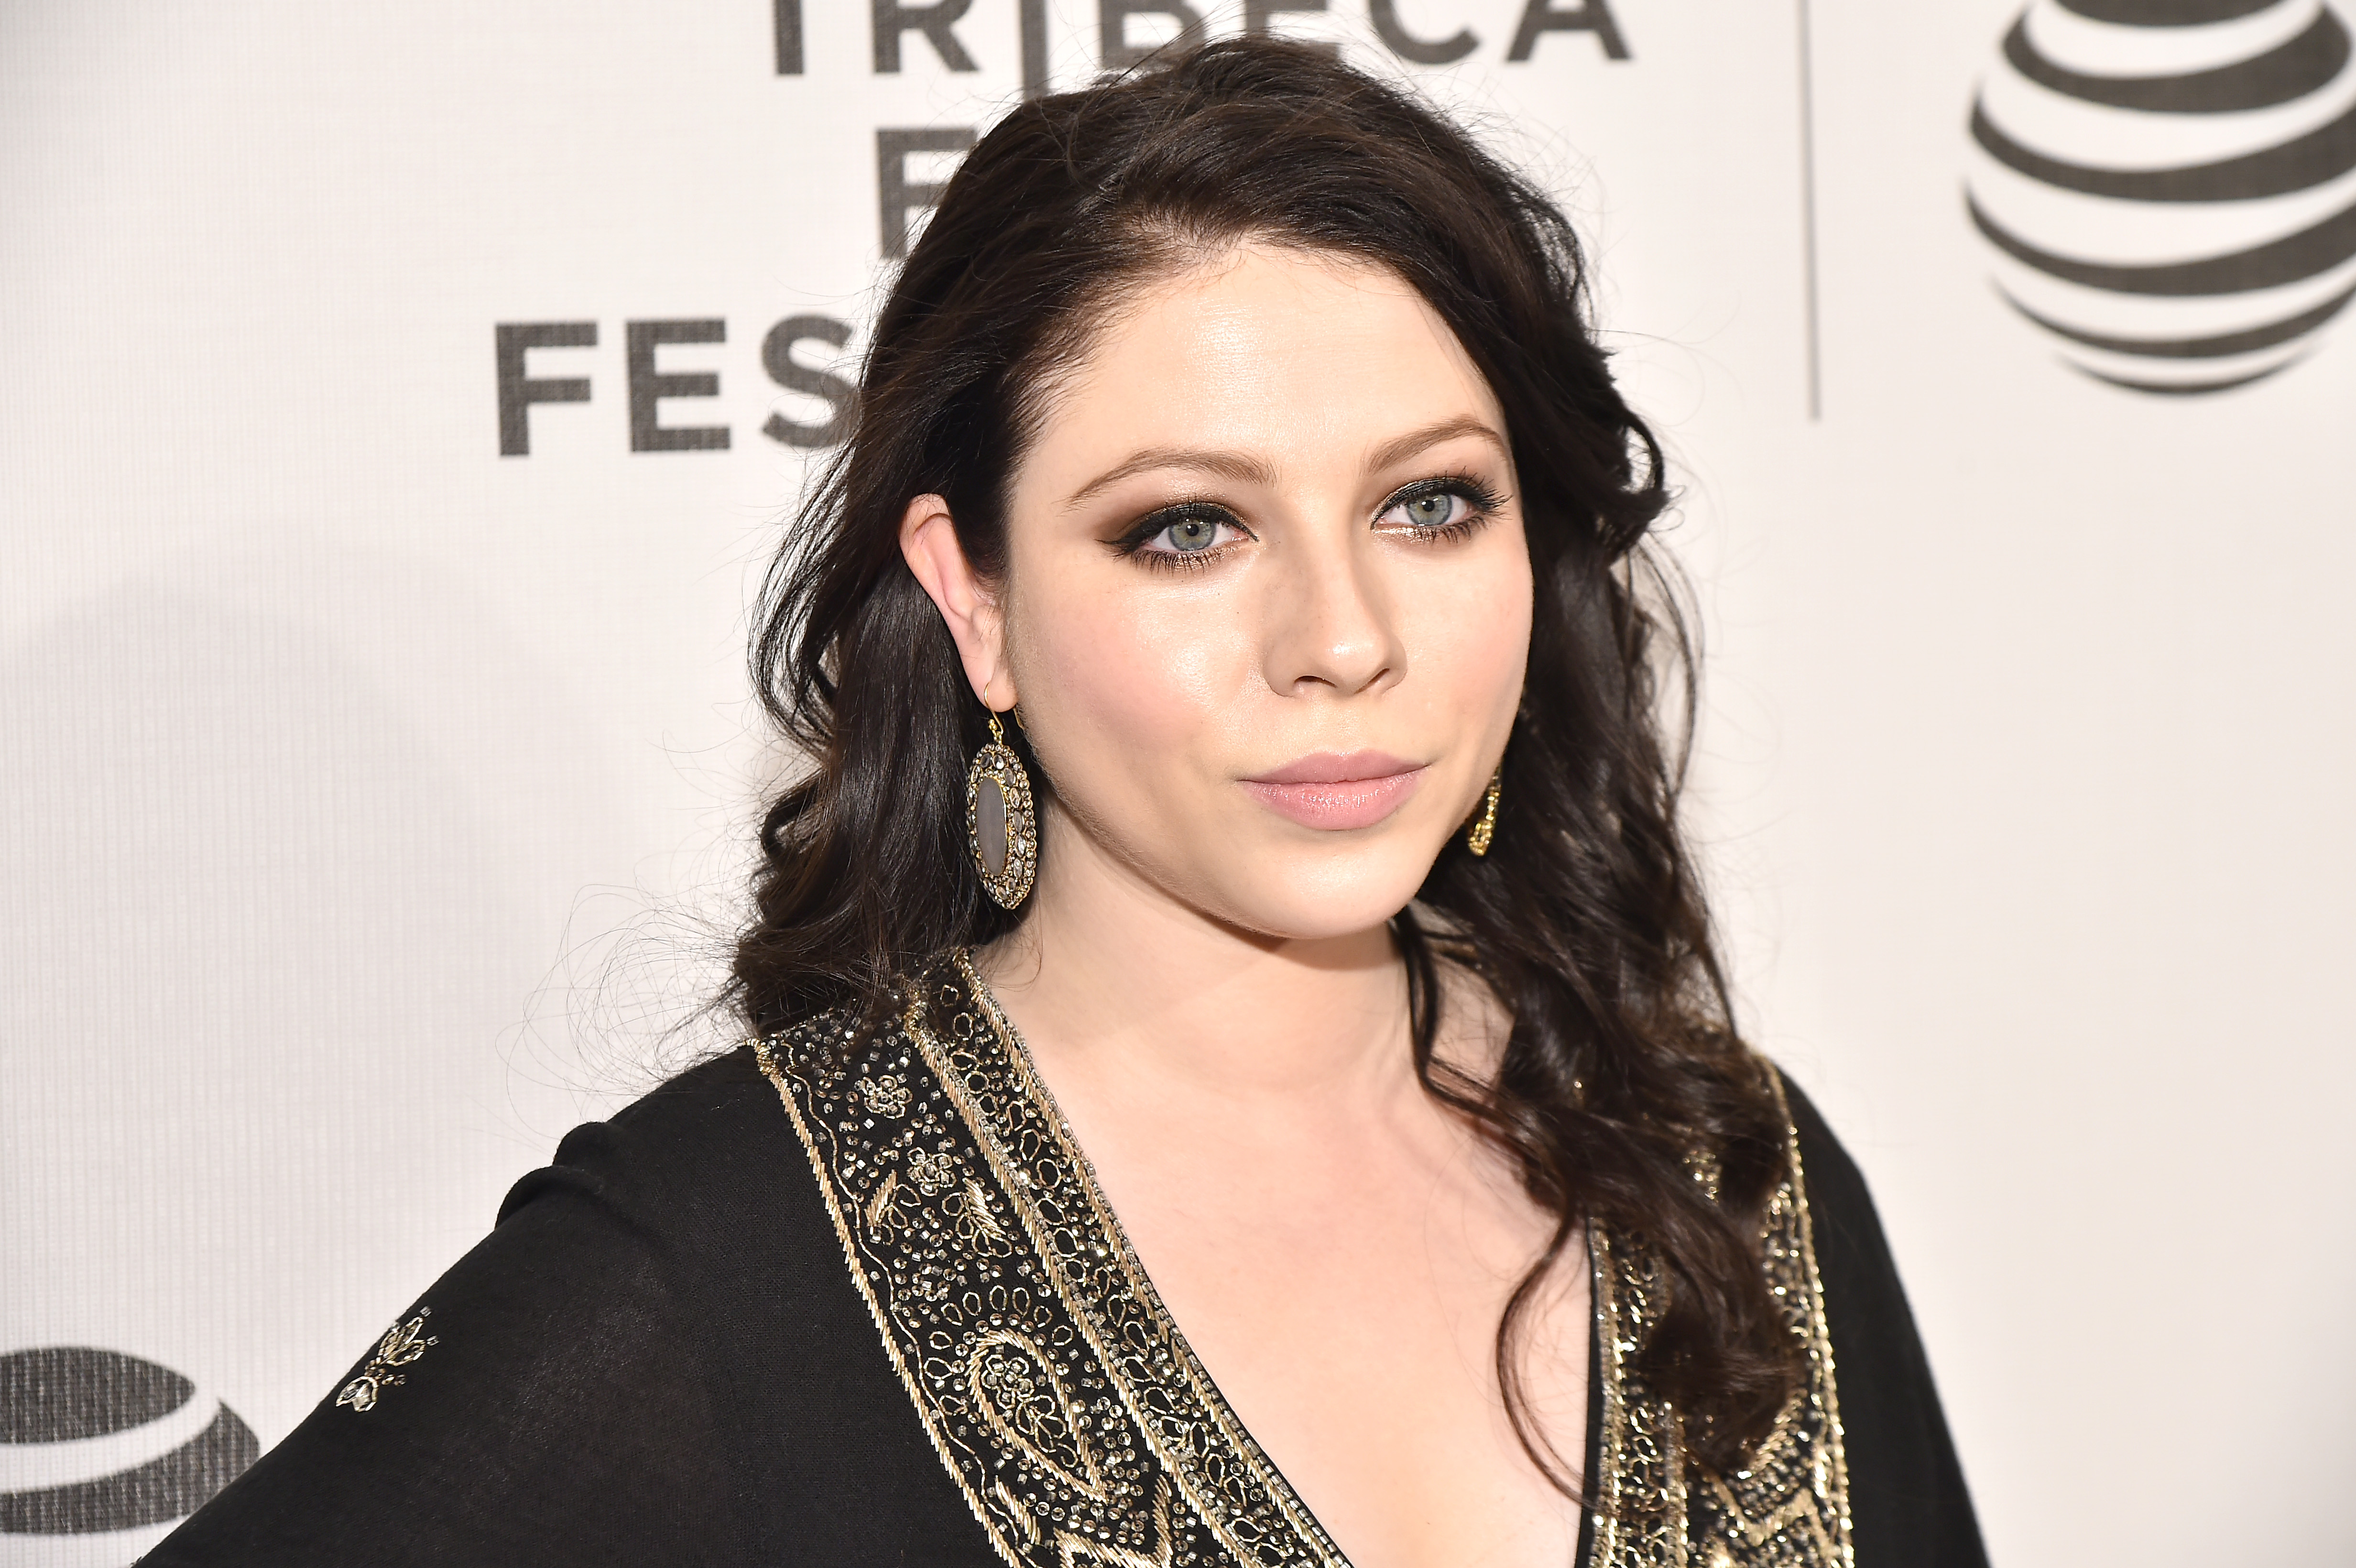 Michelle Trachtenberg on 23 April 2016 in New York City